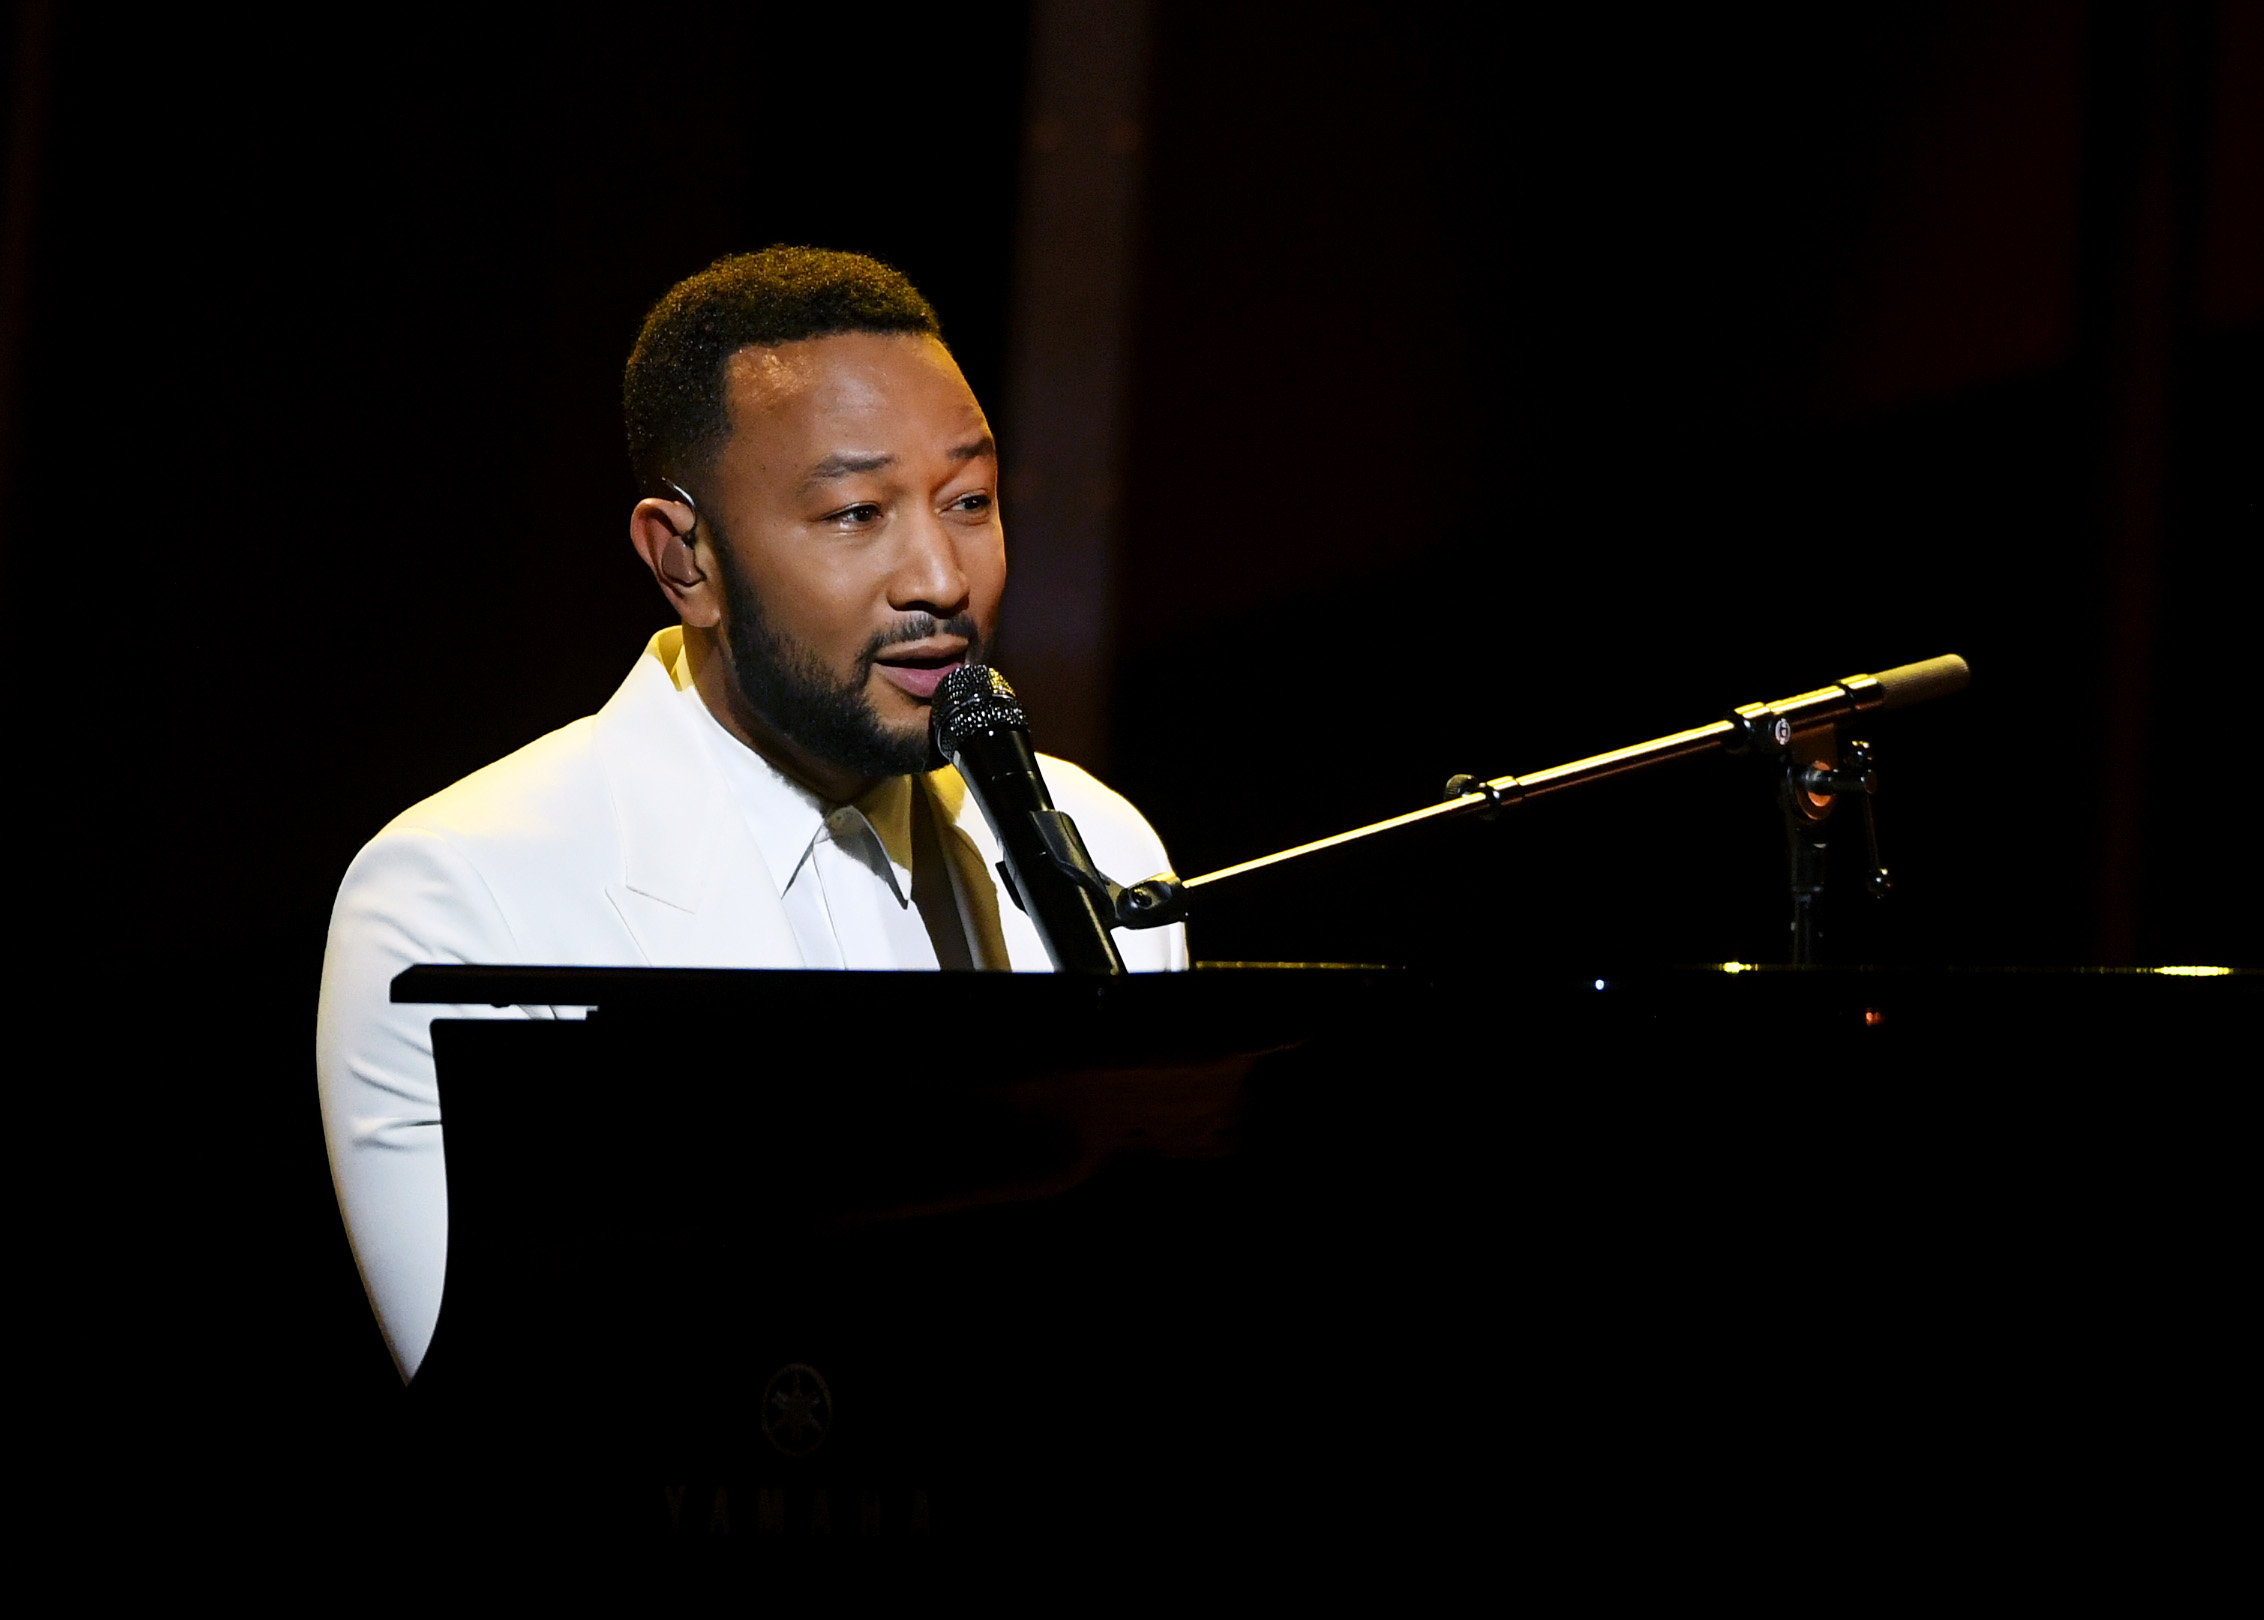 when did john legend this time come out